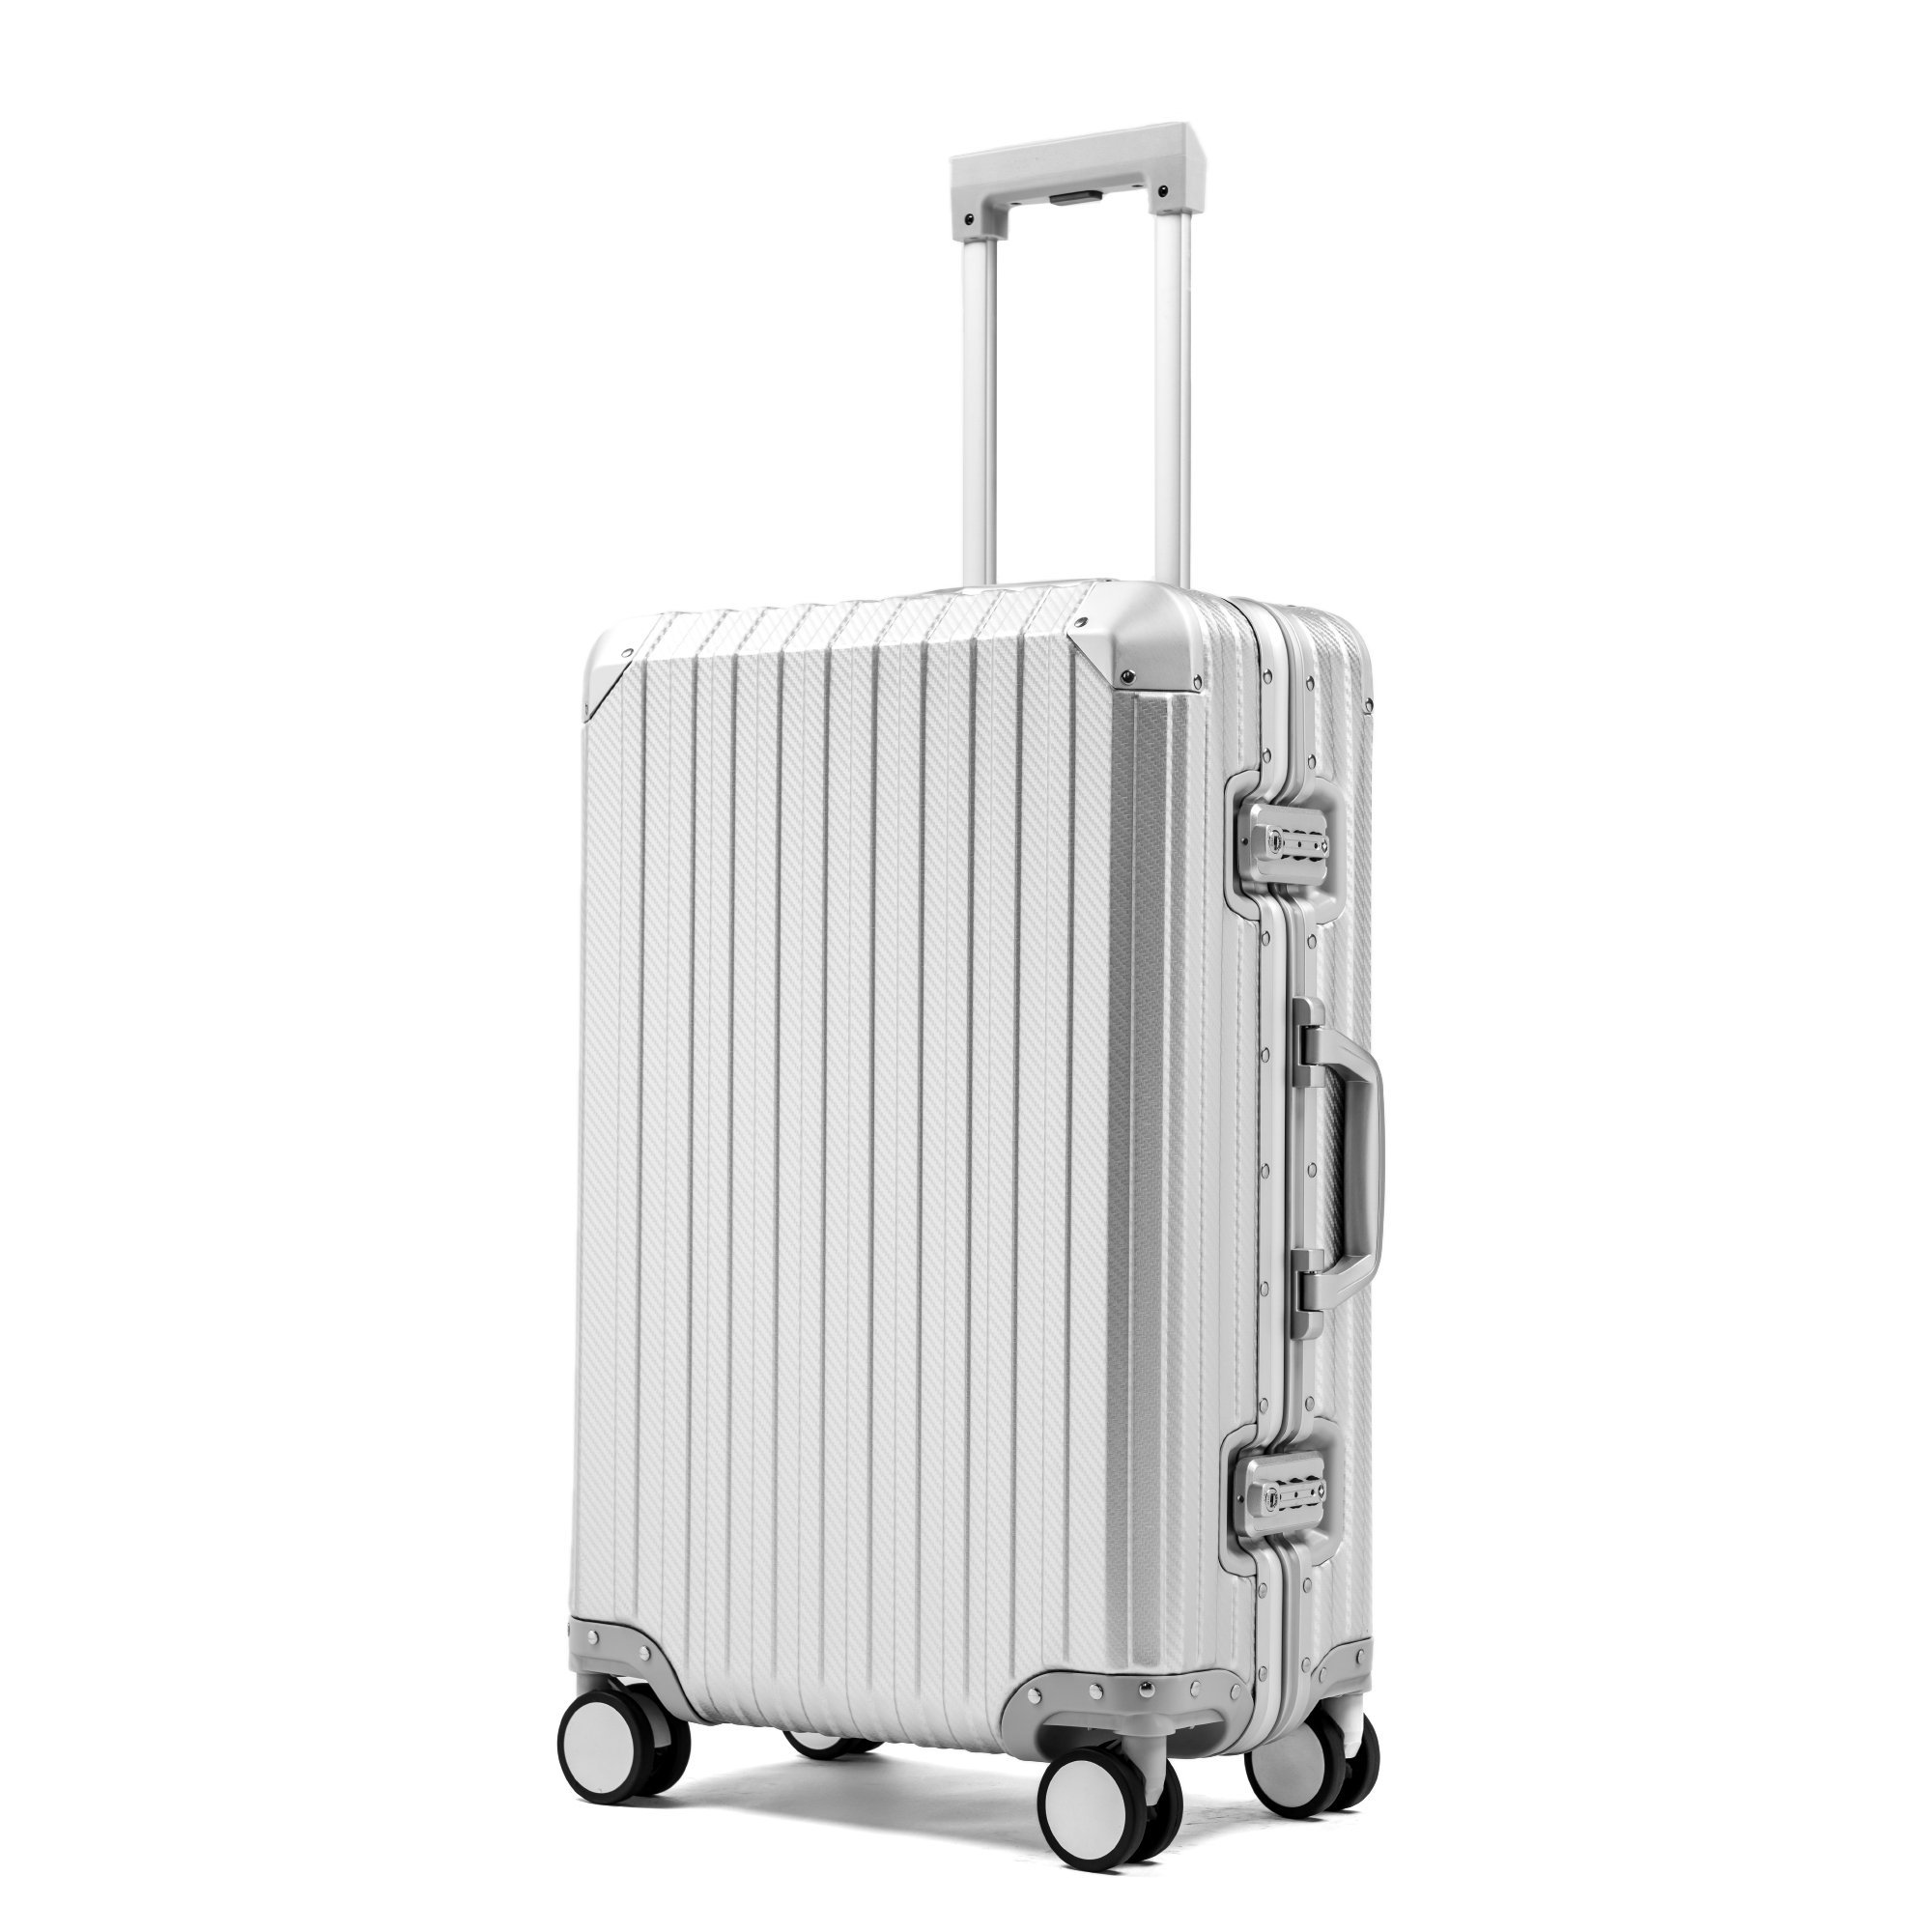 MVST Select: Our List of the Best MVST Luggage - Luggage & Travel